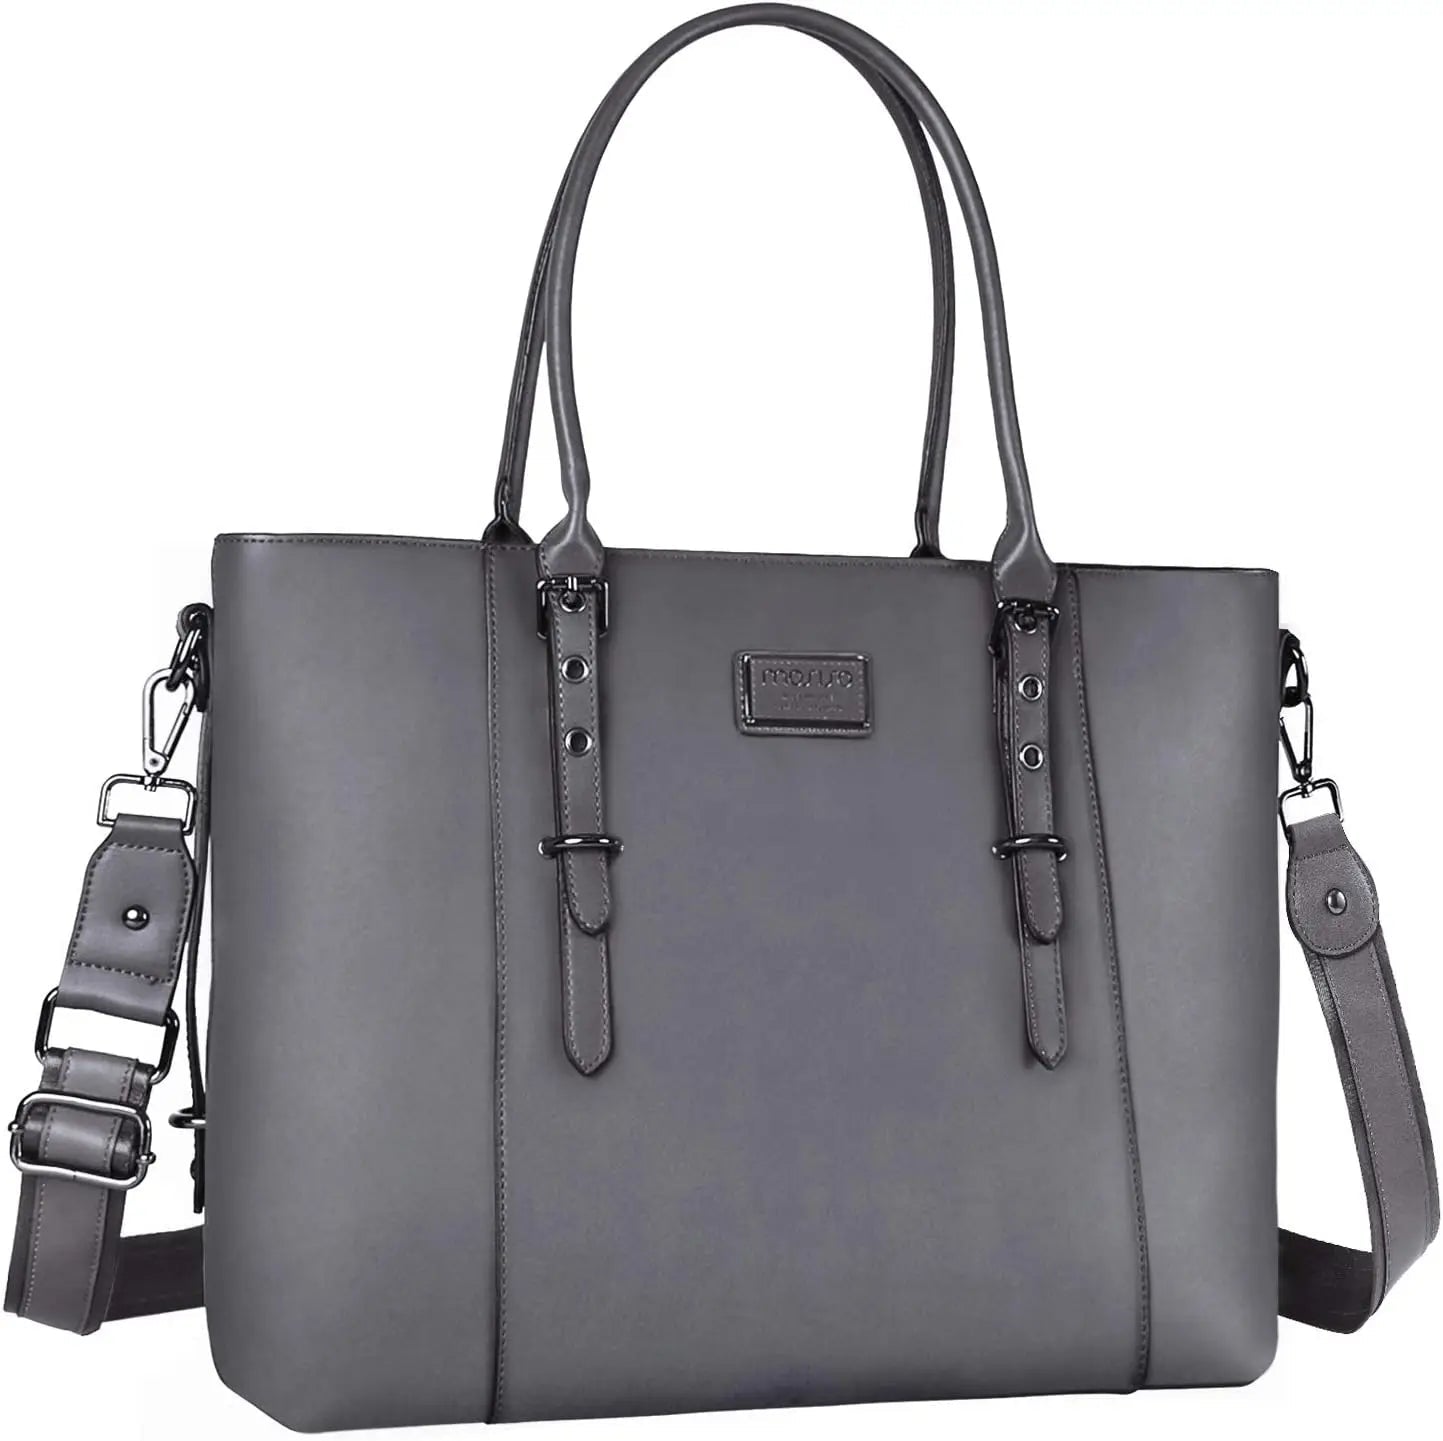 Women's 17 inch Laptop Tote The Store Bags Gray 17.3 inch 